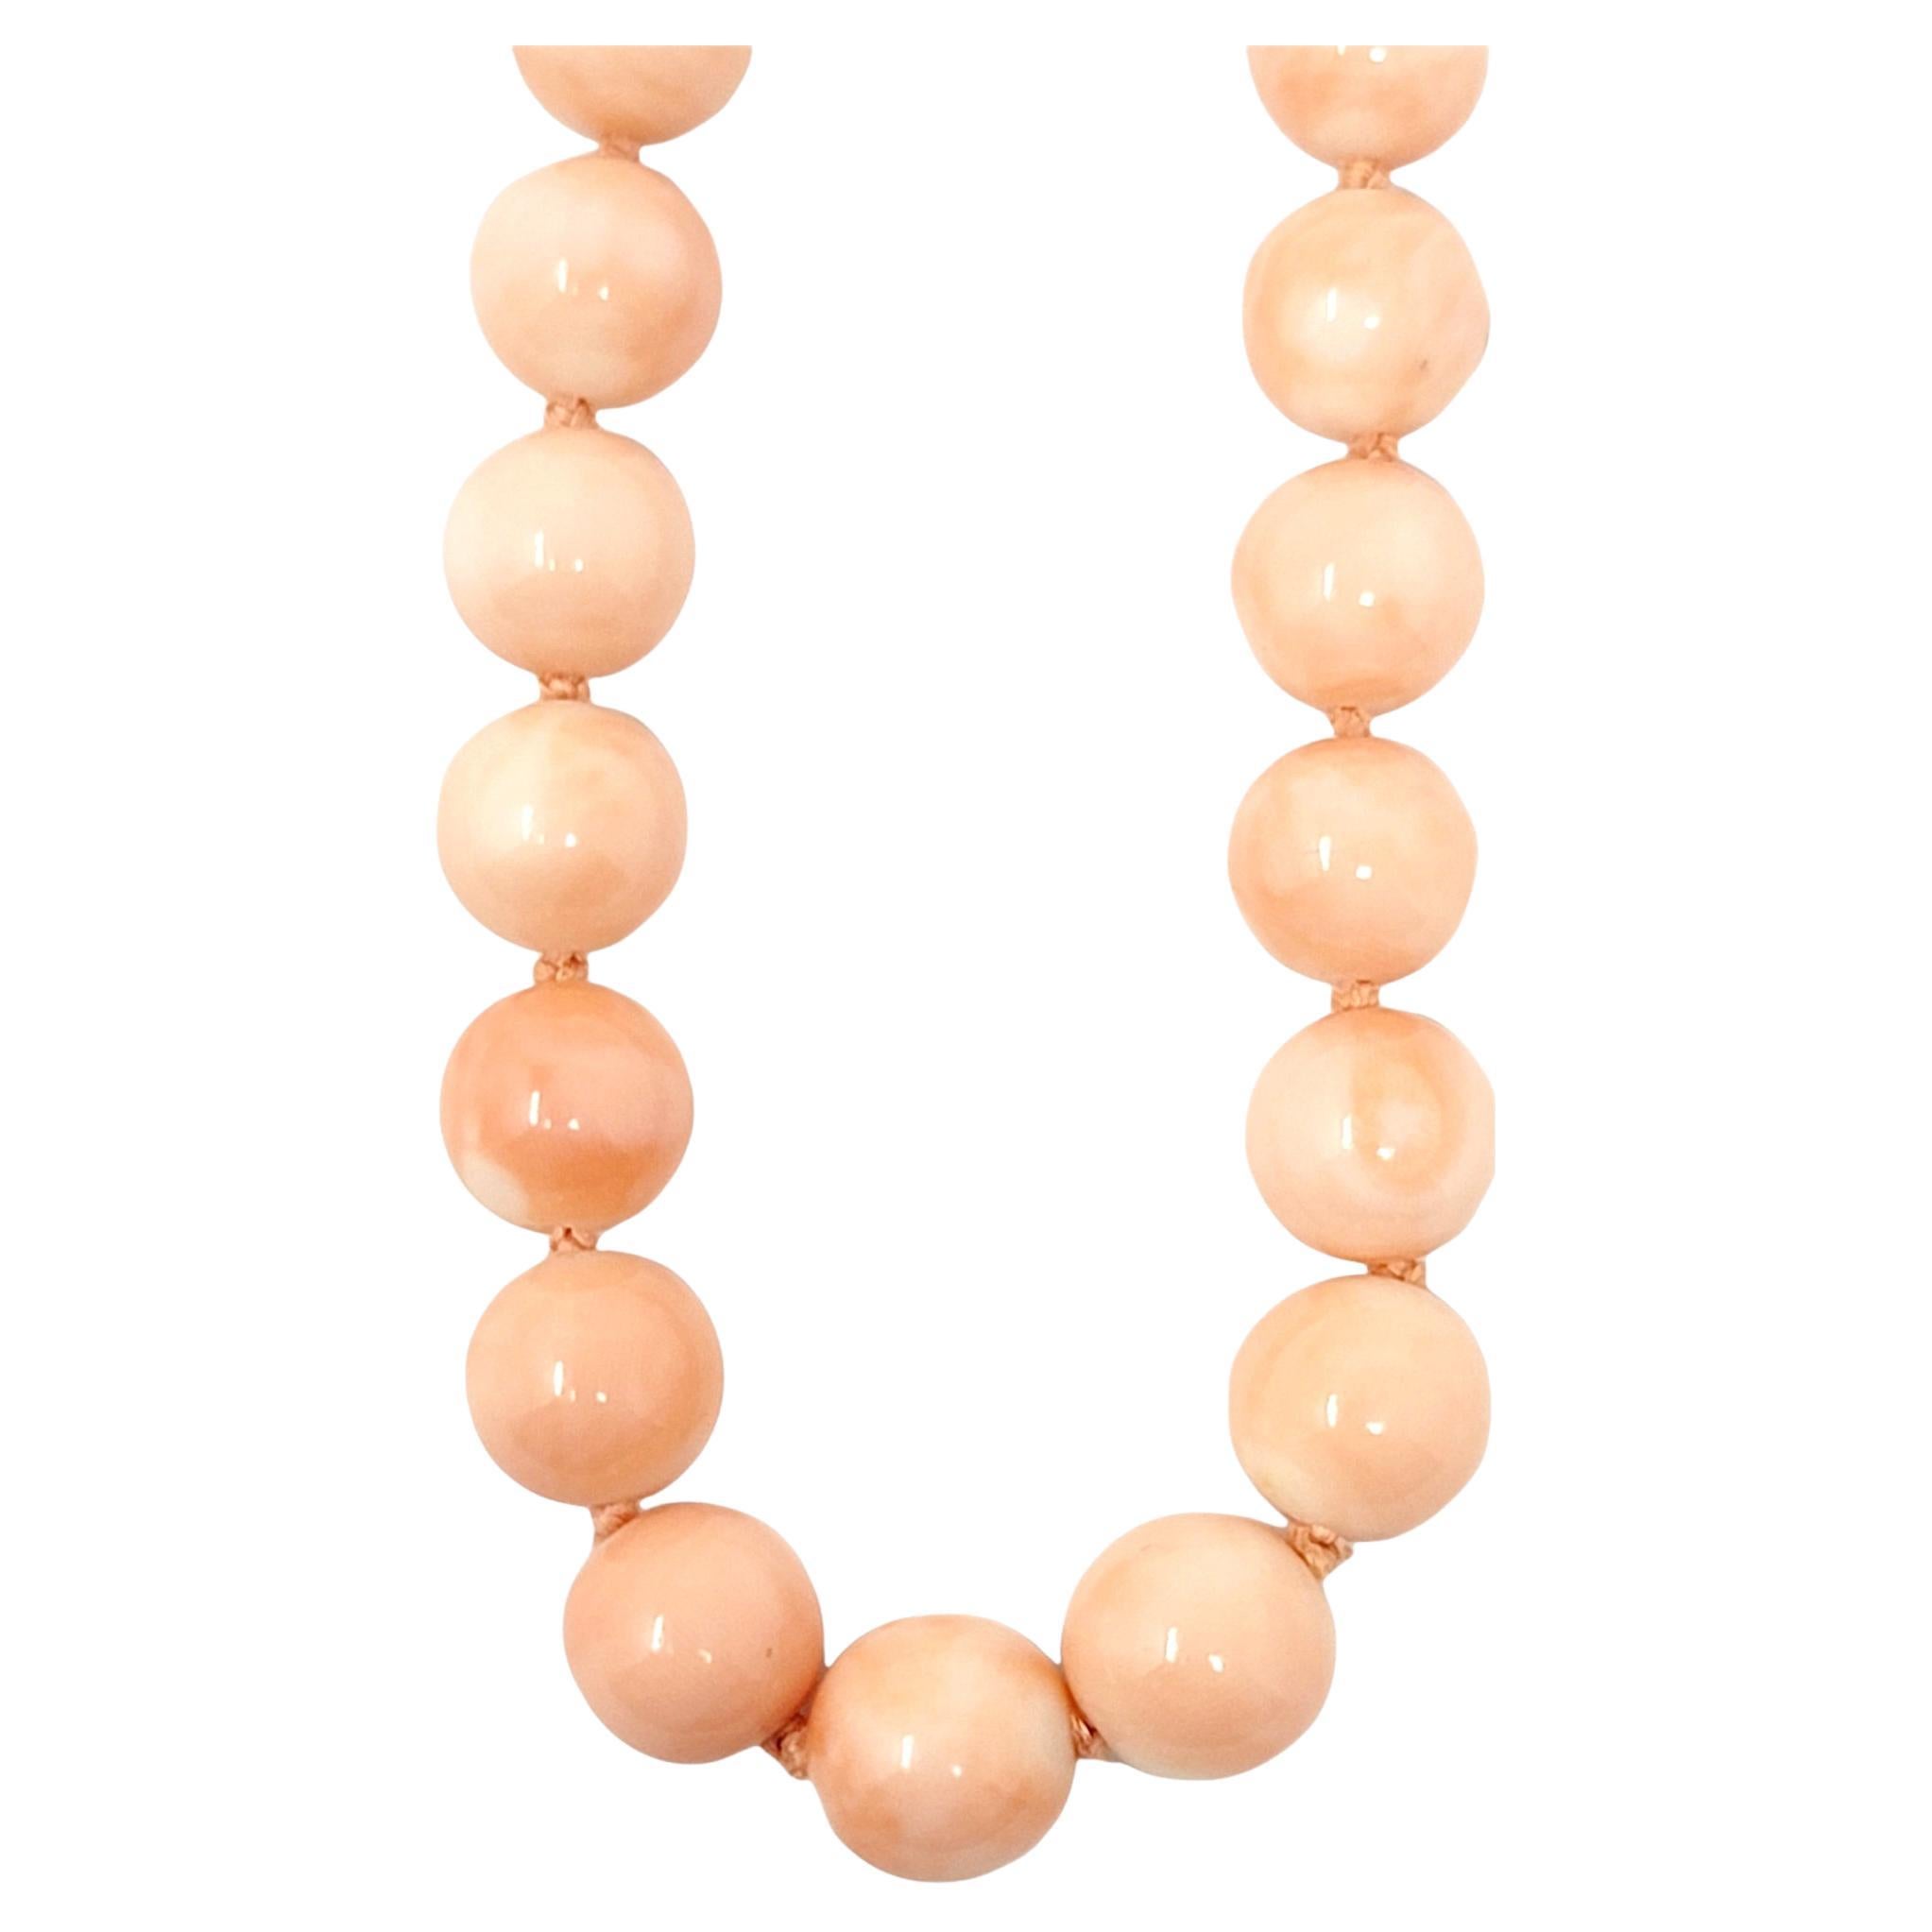 Gorgeous elegant beaded necklace with a bright pop of color! This incredible natural coral necklace features a single strand of polished, graduated coral stones in a stunning opaque orangish-pink color. Each stone's shade varies slightly, adding to